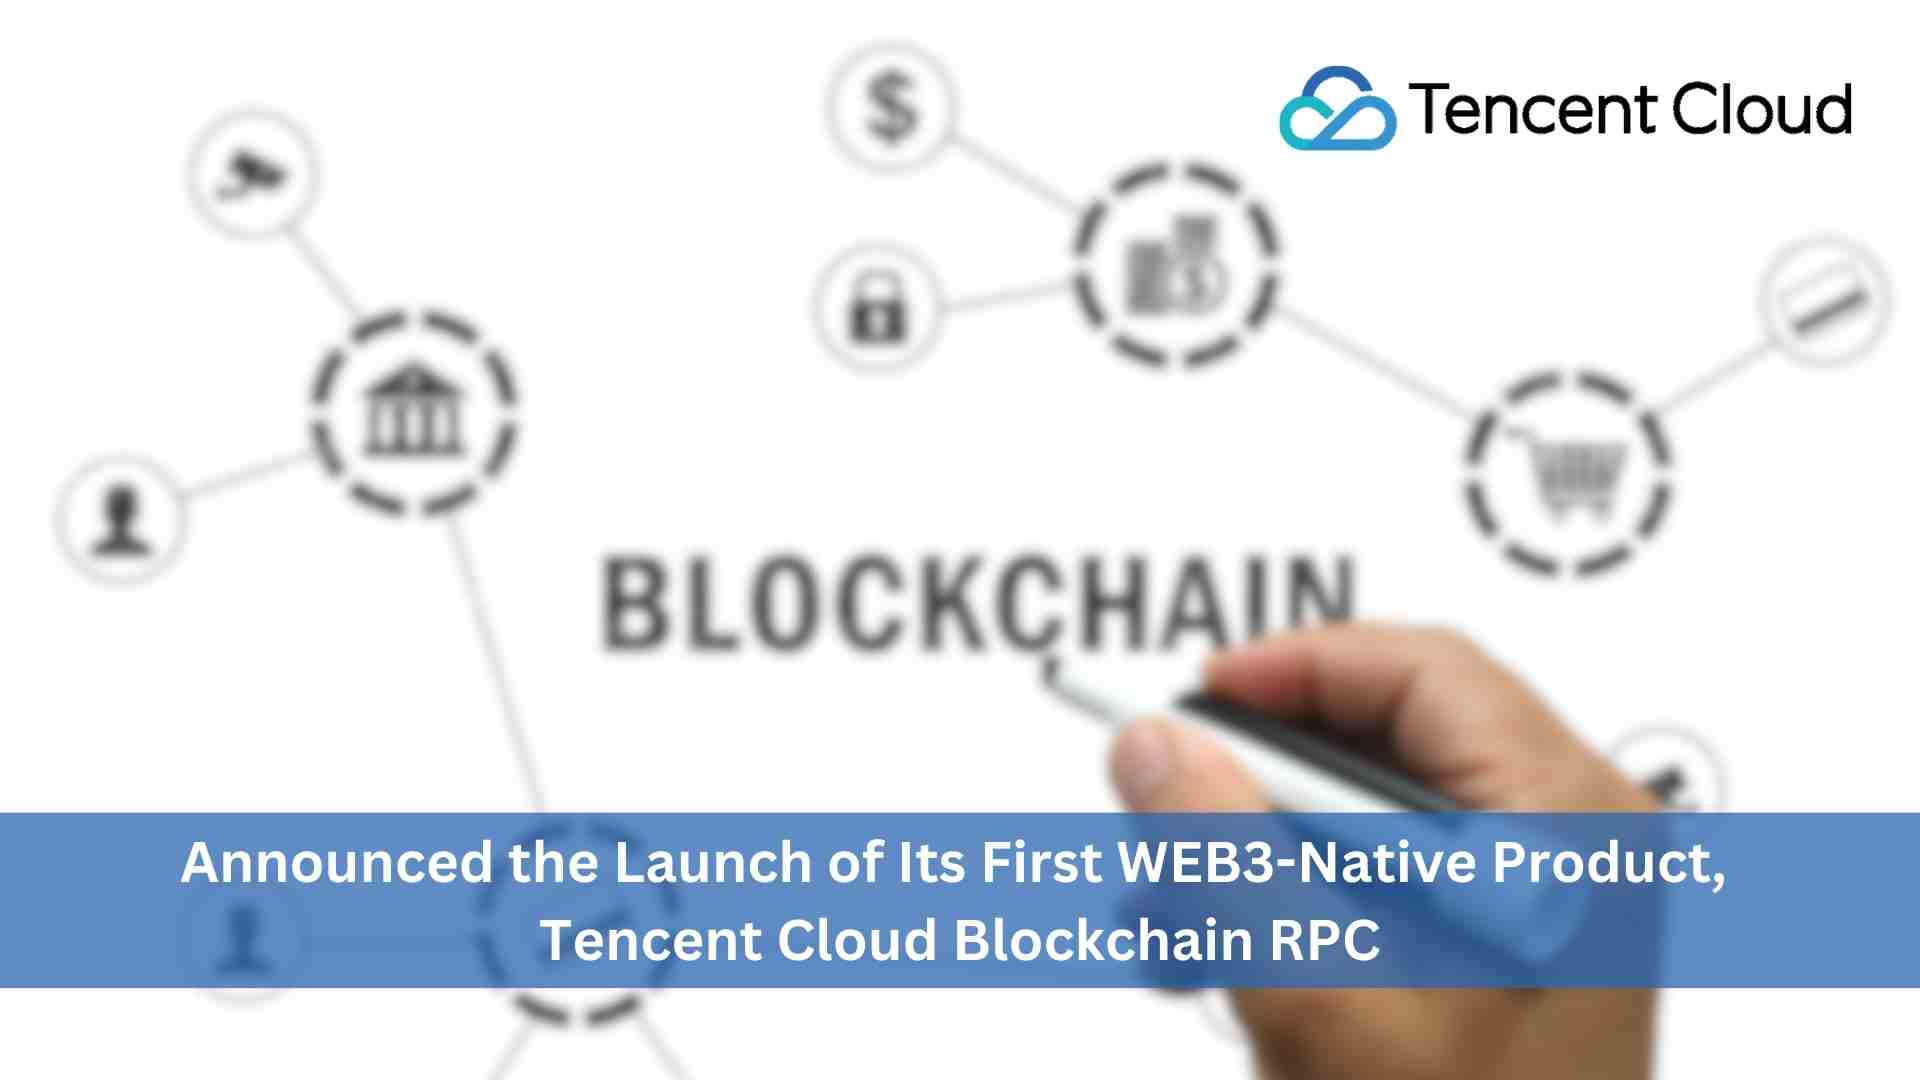 Tencent Cloud Launches Inaugural Web3 Product Tencent Cloud Blockchain RPC for Developers and Enterprises